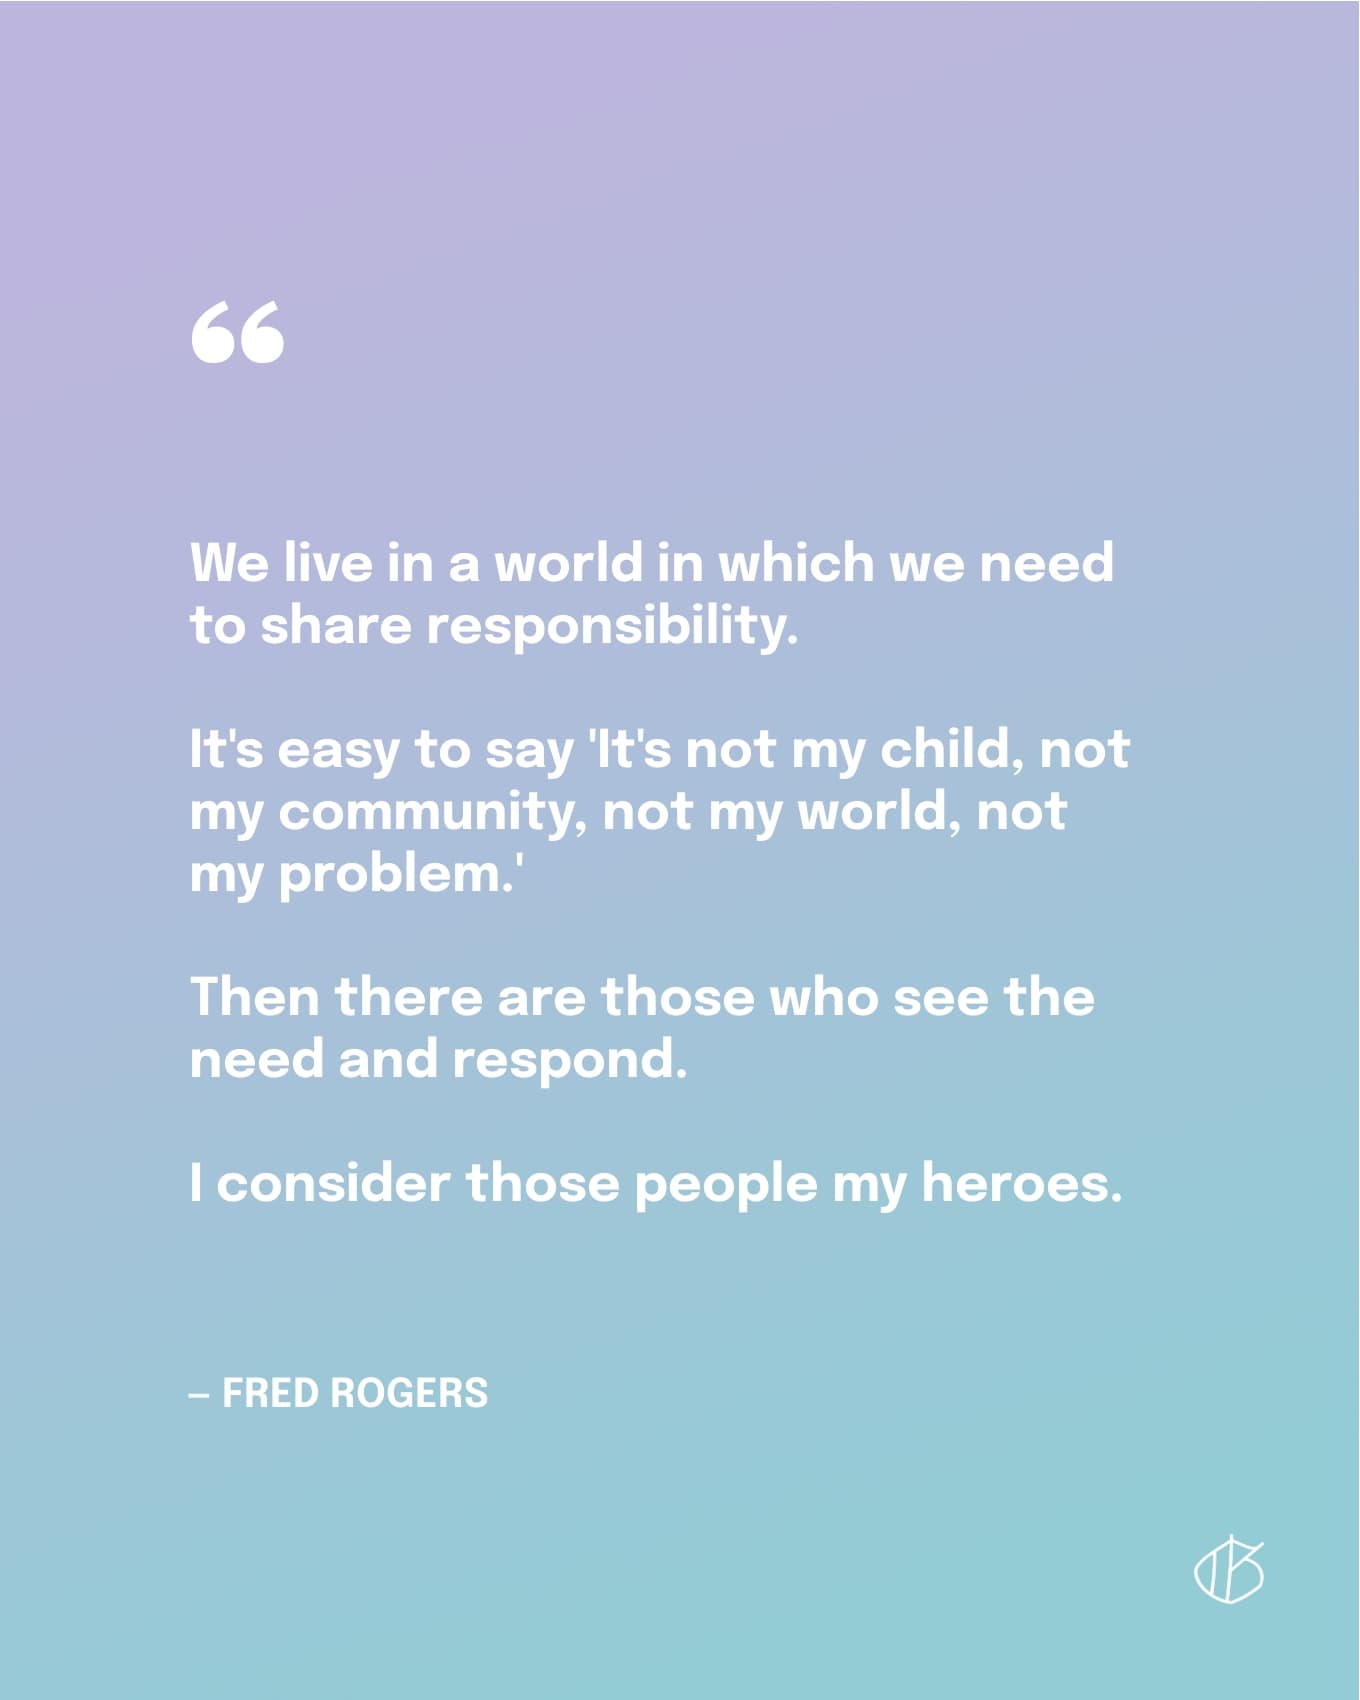 “We live in a world in which we need to share responsibility. It's easy to say 'It's not my child, not my community, not my world, not my problem.' Then there are those who see the need and respond. I consider those people my heroes.” — Mister Fred Rogers